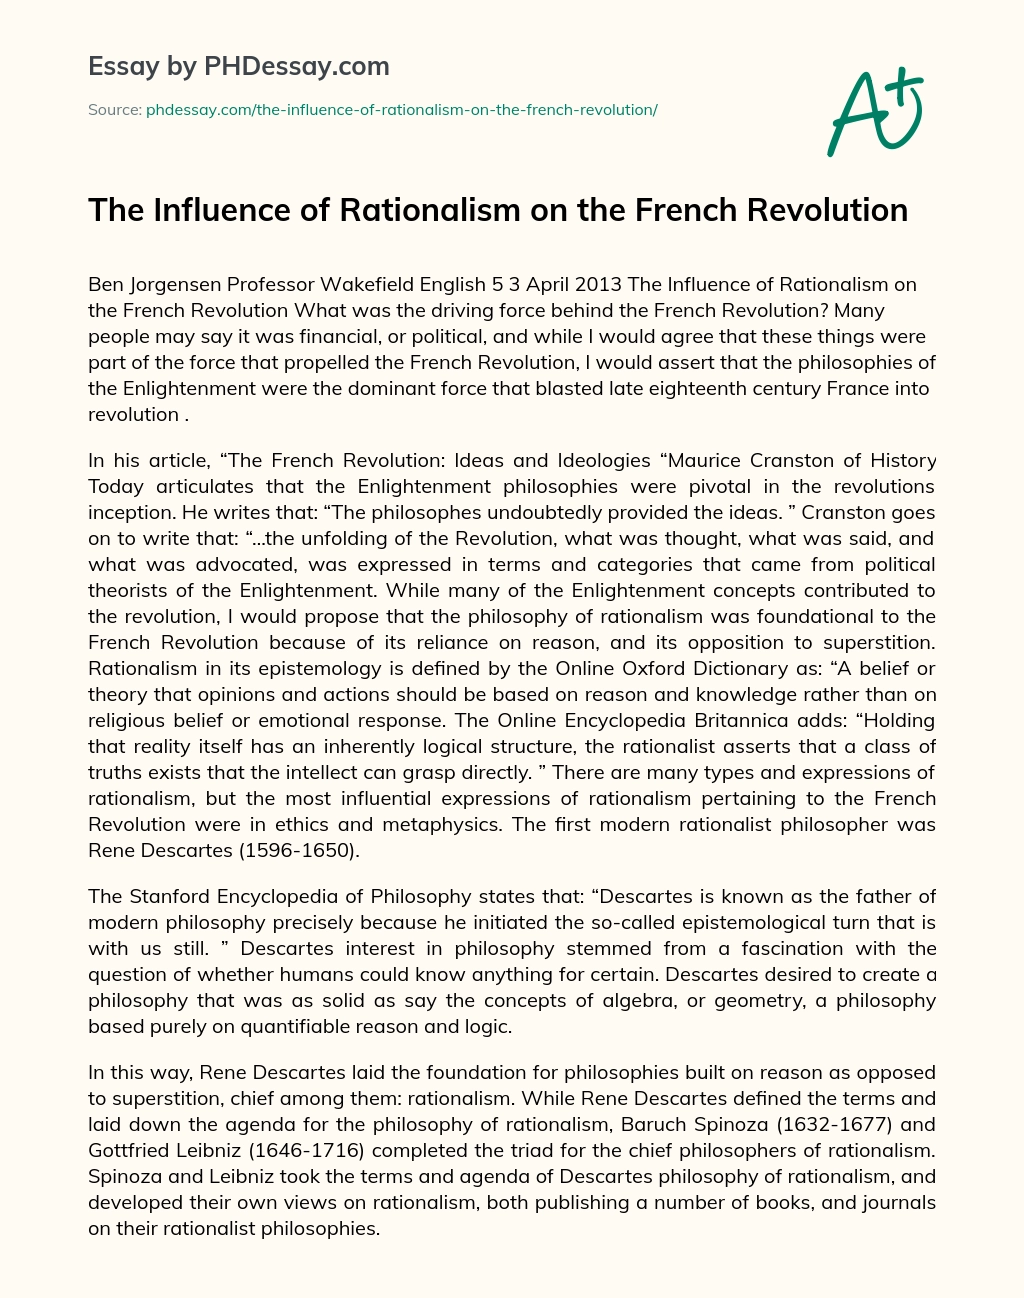 The Influence of Rationalism on the French Revolution essay